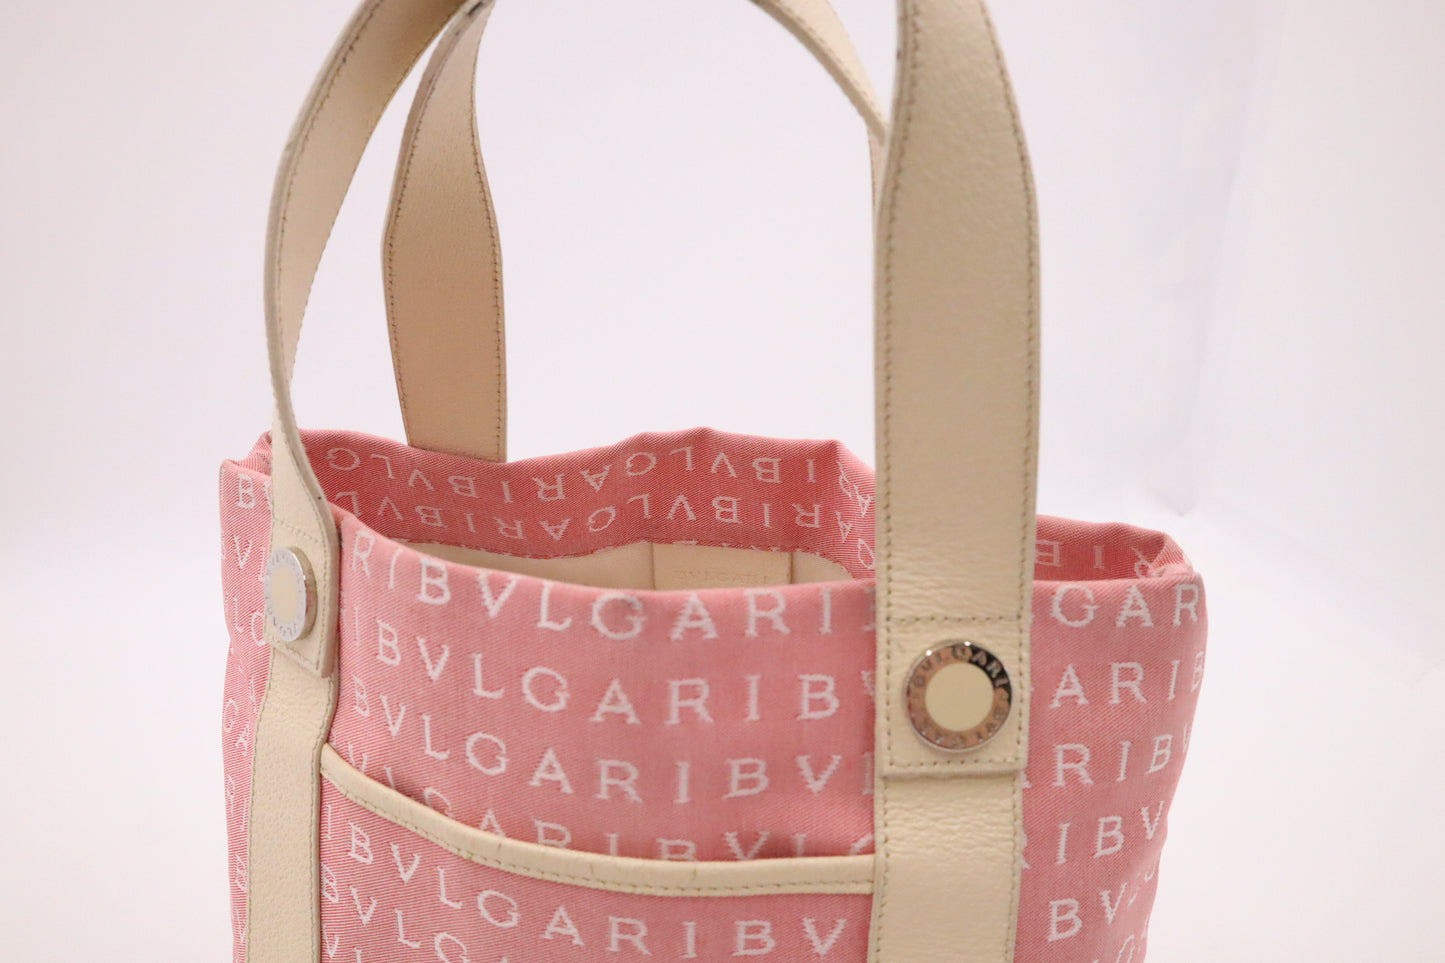 Bvlgari Tote in Pink Canvas